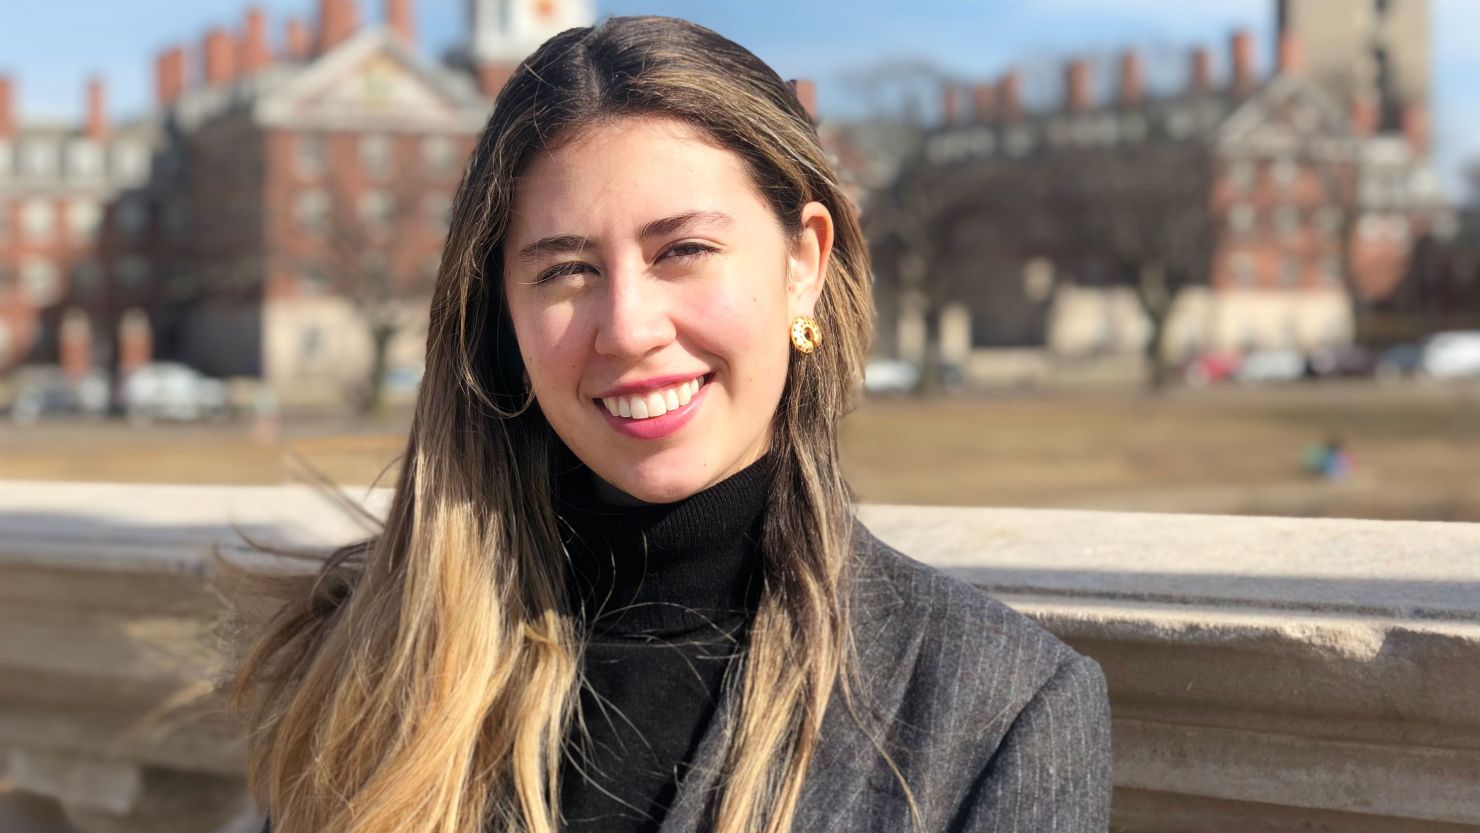 Raquel Coronell Uribe will be the first Hispanic president of the Harvard Crimson, America's oldest published daily college paper.